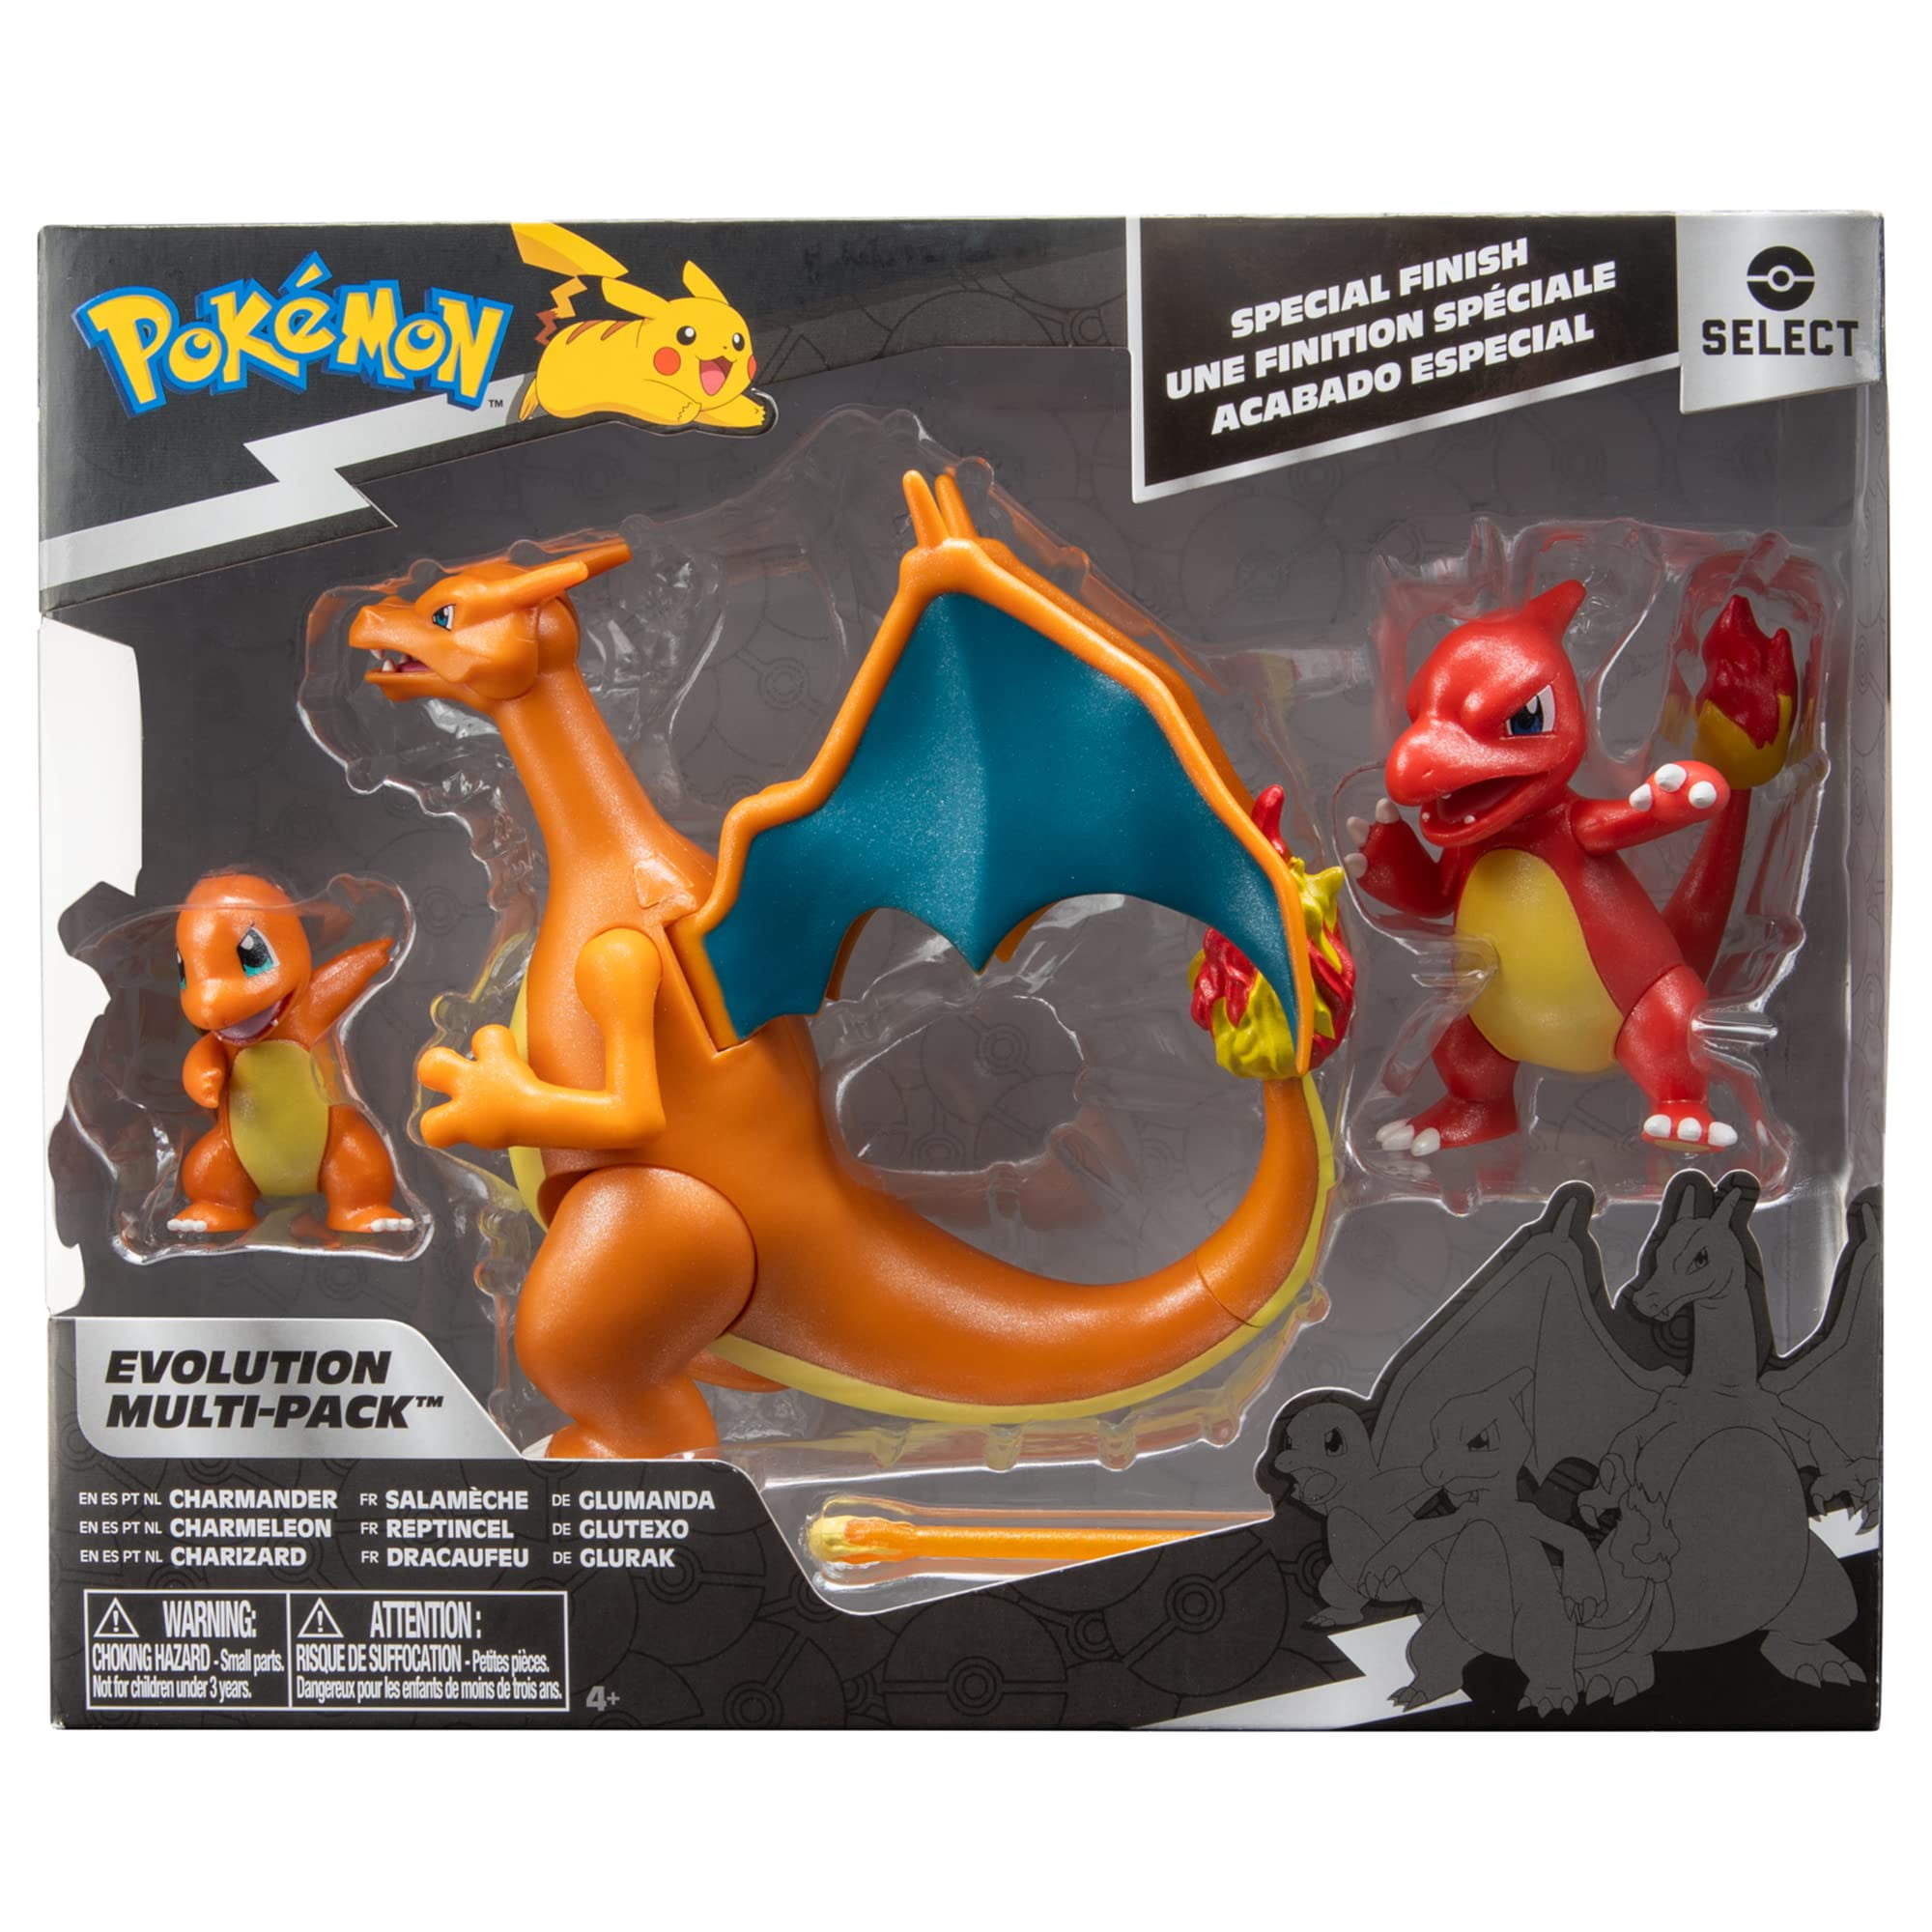 POKEMON Select Evolution 3 Pack - Features 2-Inch Charmander, 3